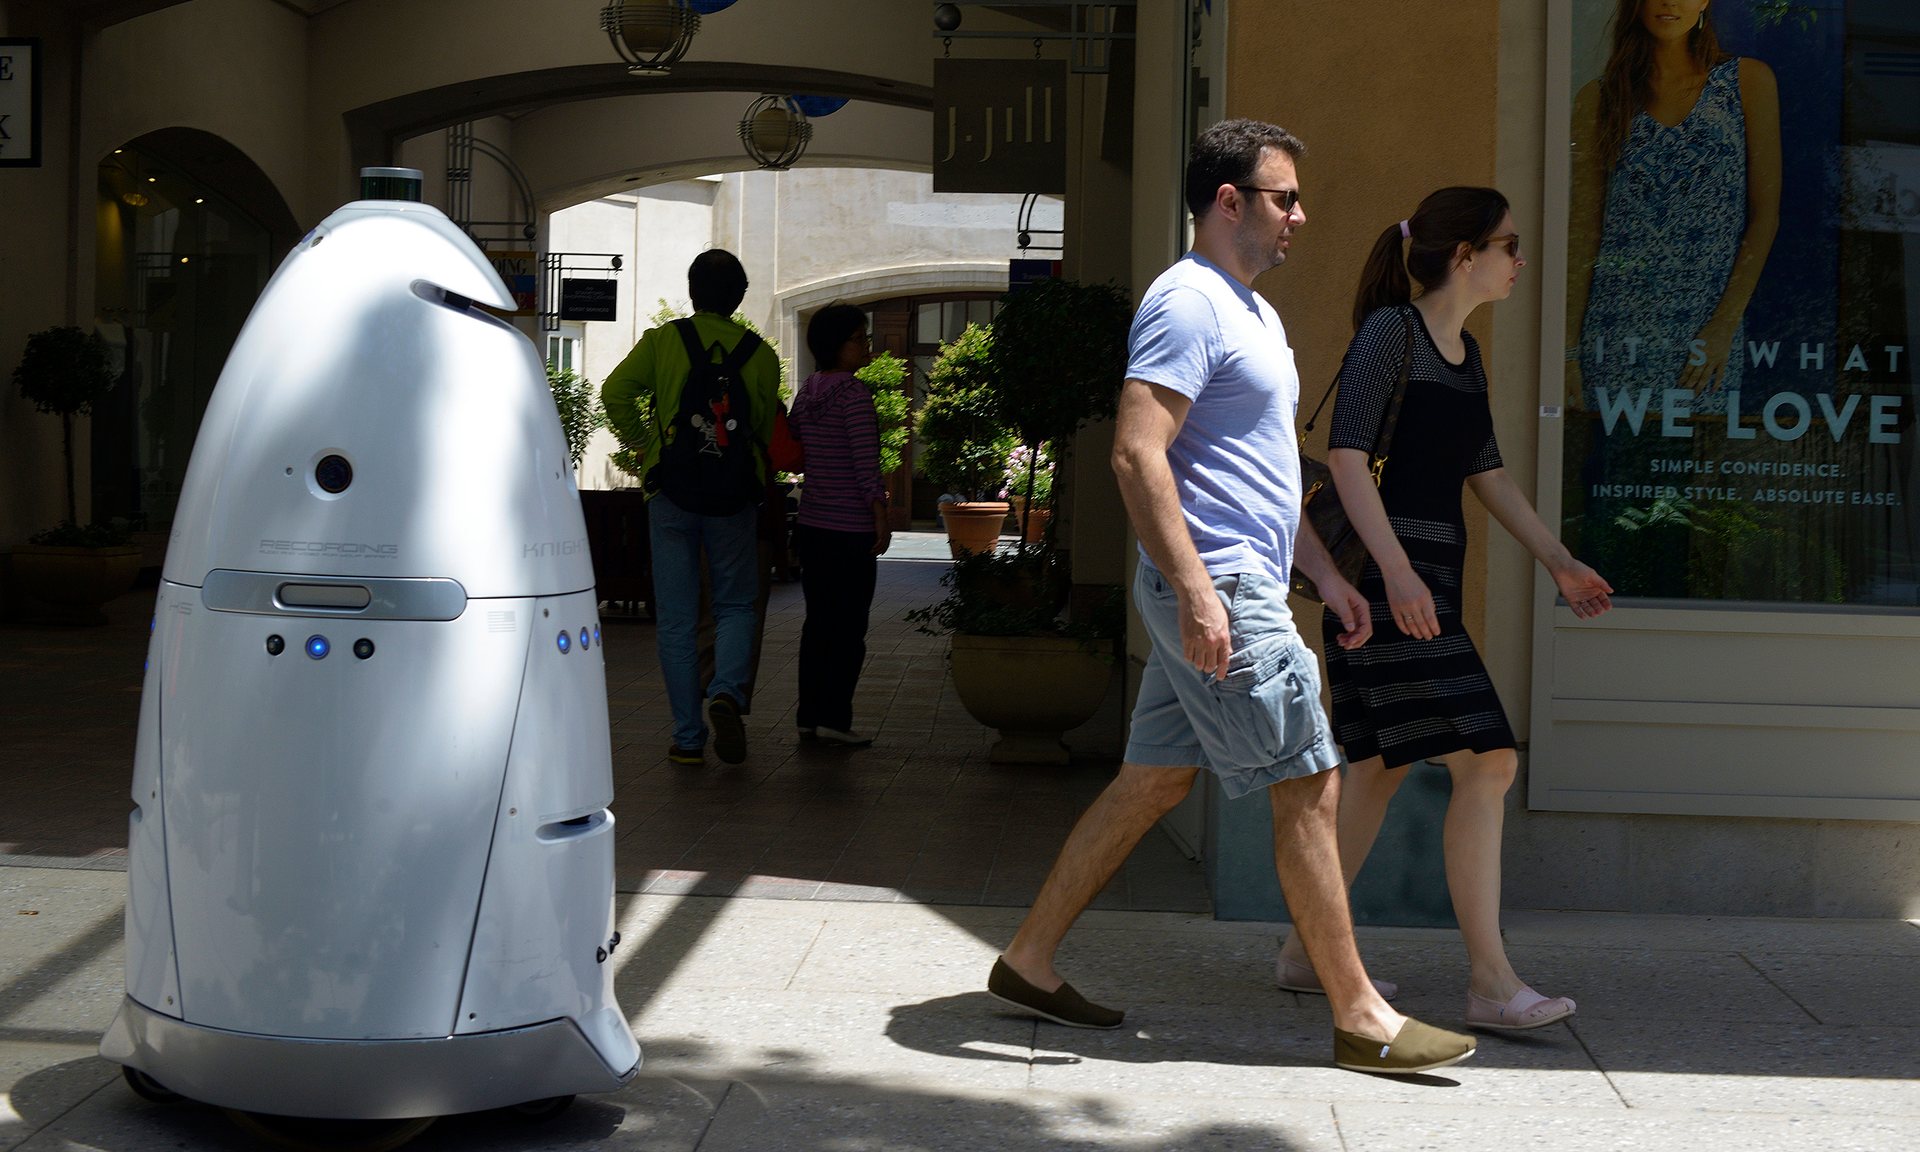 RoboCop is real – and could be patrolling a mall near you